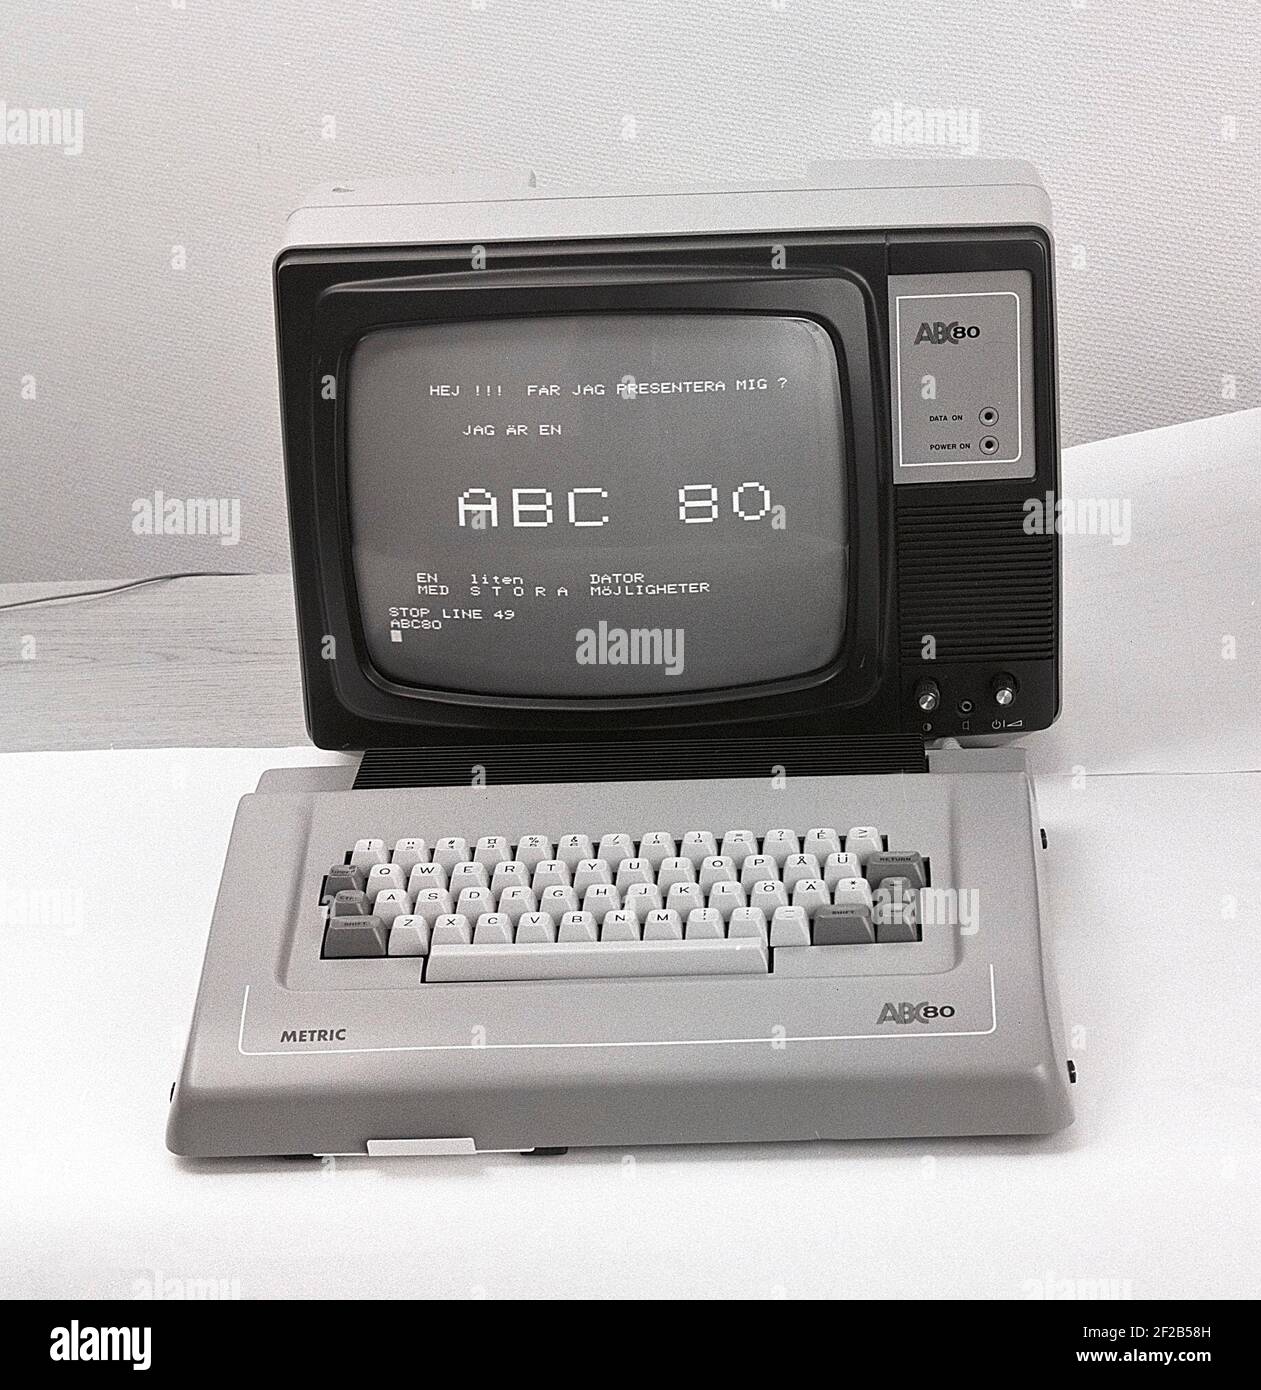 ABC 80. Advanced Basic Computer 80 was a personal computer engineered by the Swedish corporation Dataindustrier and manufactured by Luxor in the late 1970s. It was introduced to the market on august 24 1978 just as the personal computer was an international phenomenon. By the year 1979 ABC80 was the most popular personal computer in Sweden and it was also used in schools. The ABC80 computer was the reason for the fast development of computer usage. Photo Kristoffersson EK155-7 Stock Photo